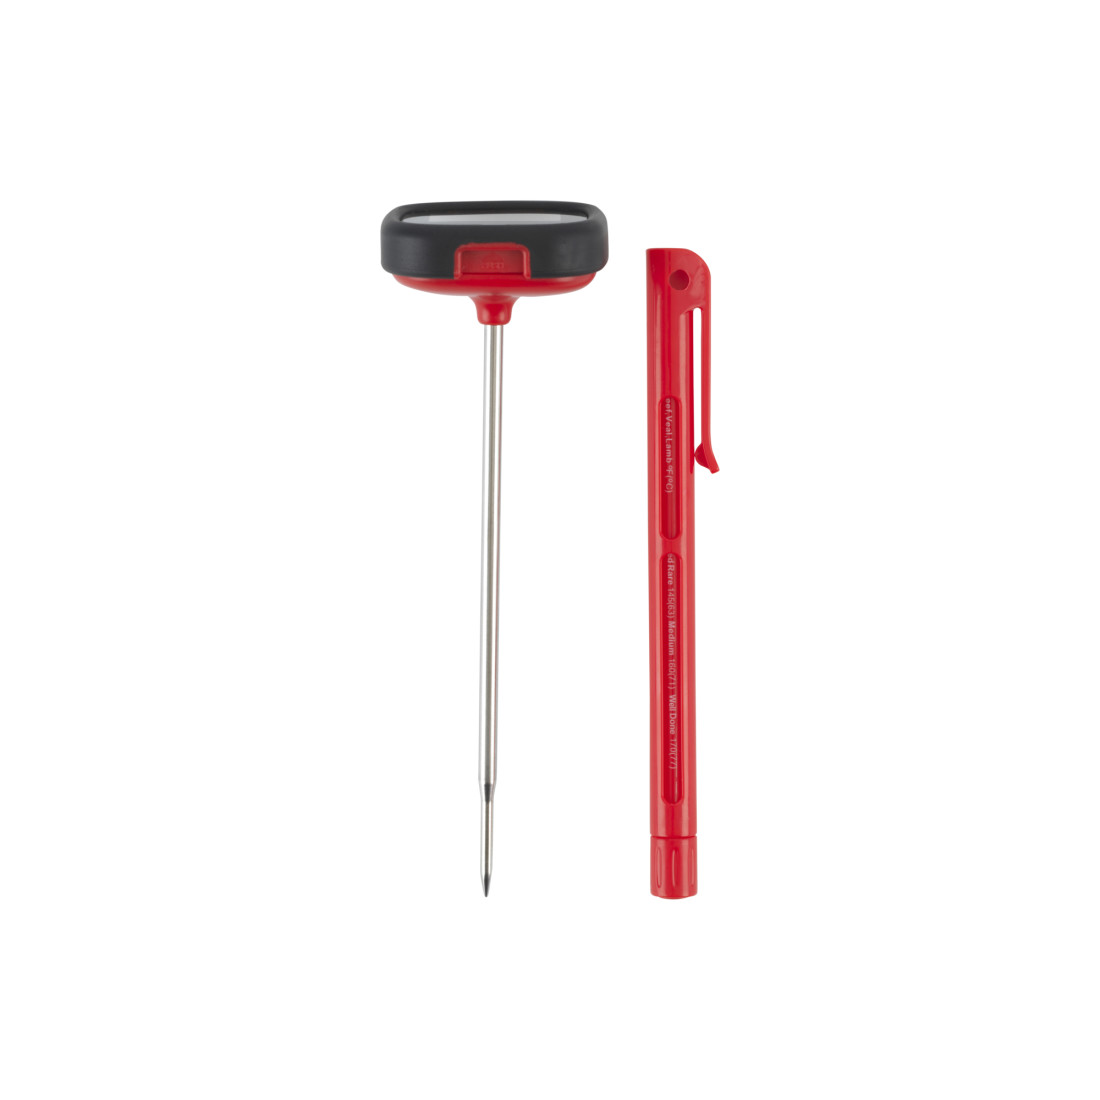 GoodCook Touch Candy/Deep Fry Thermometer - GoodCook